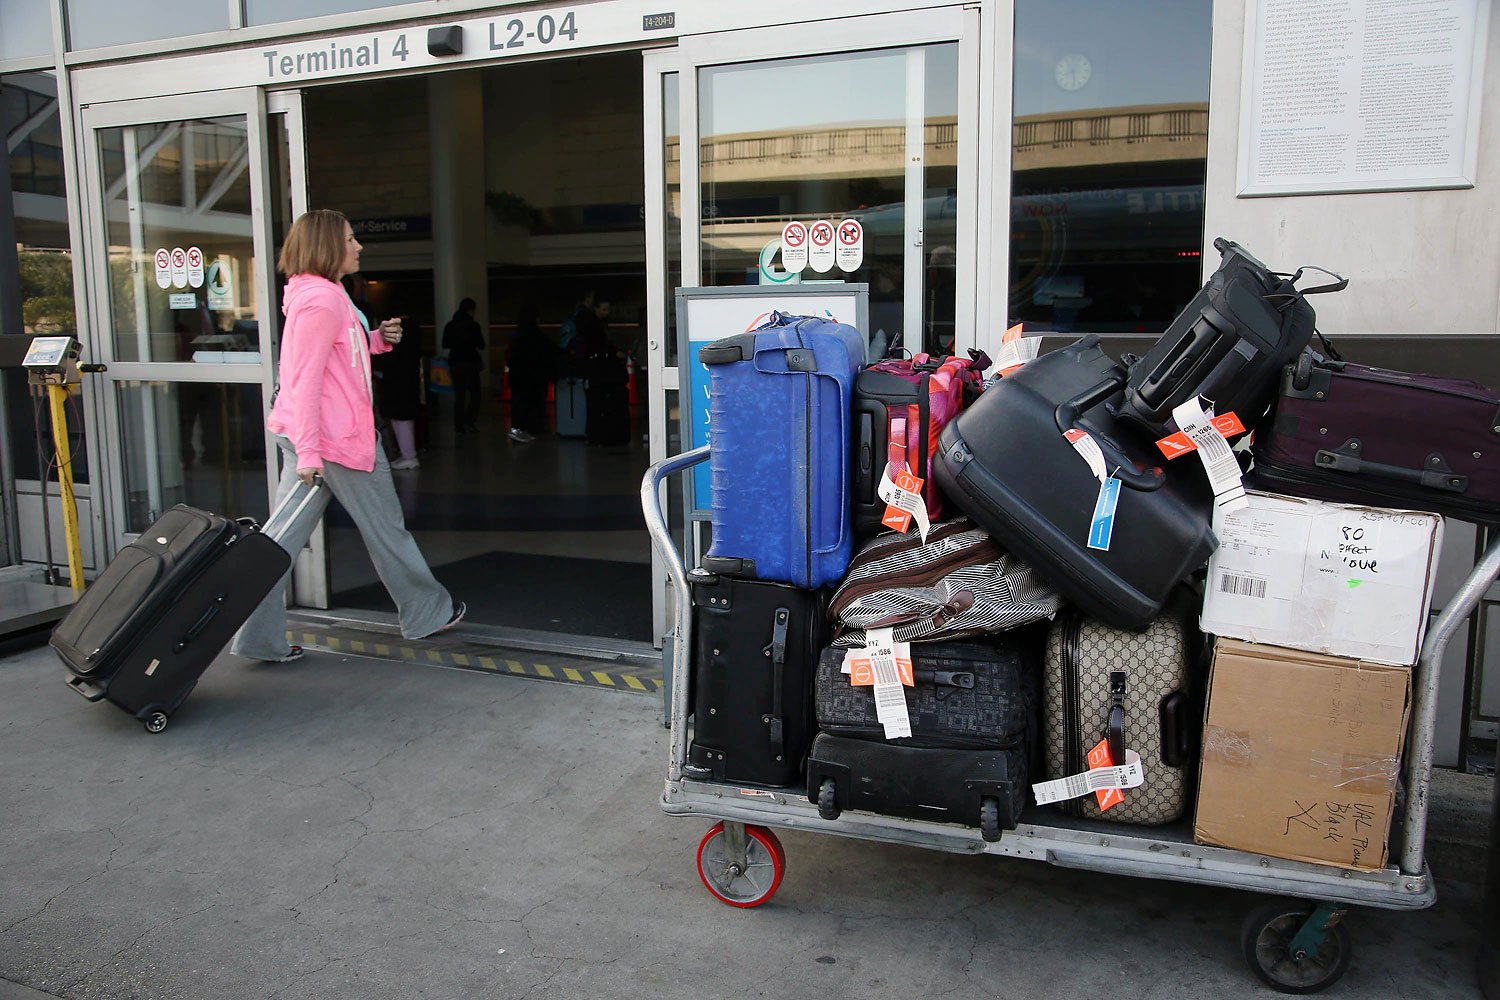 LAX Luggage Thefts